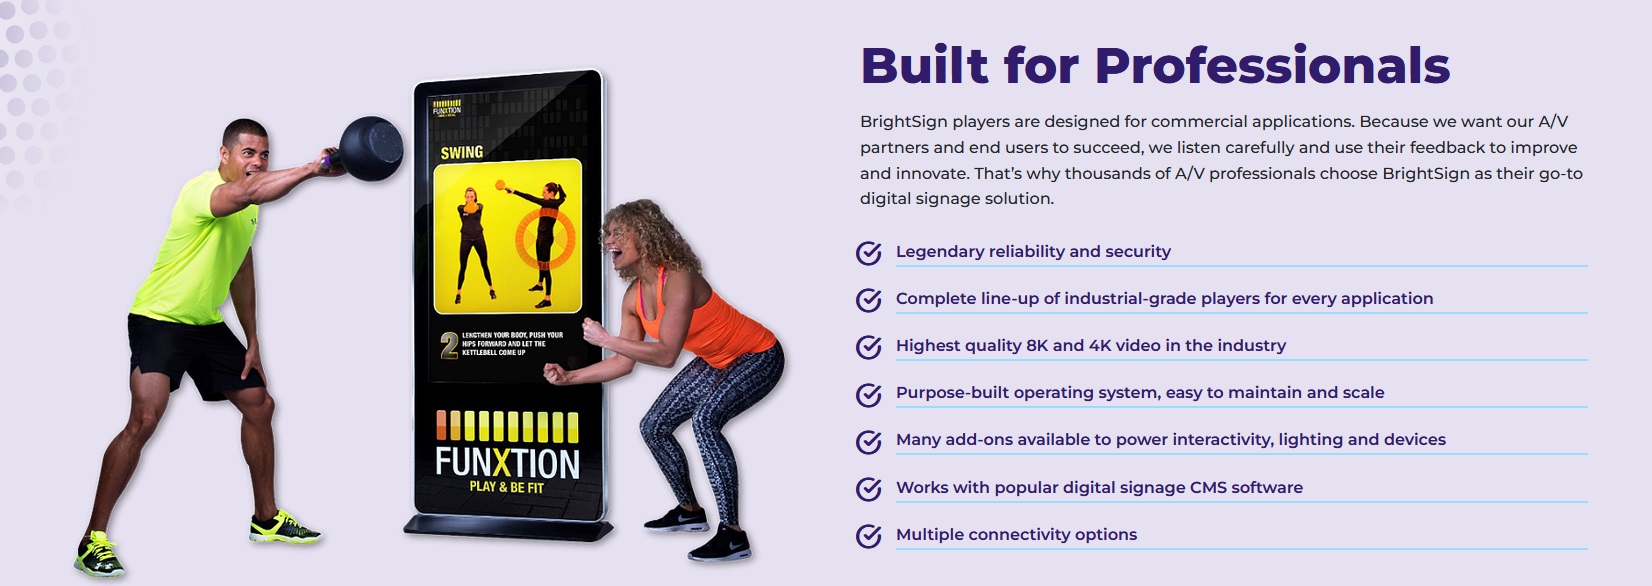 BrightSign players are designed for commercial applications. Because we want our A/V partners and end users to succeed, we listen carefully and use their feedback to improve and innovate. That’s why thousands of A/V professionals choose BrightSign as their go-to digital signage solution.